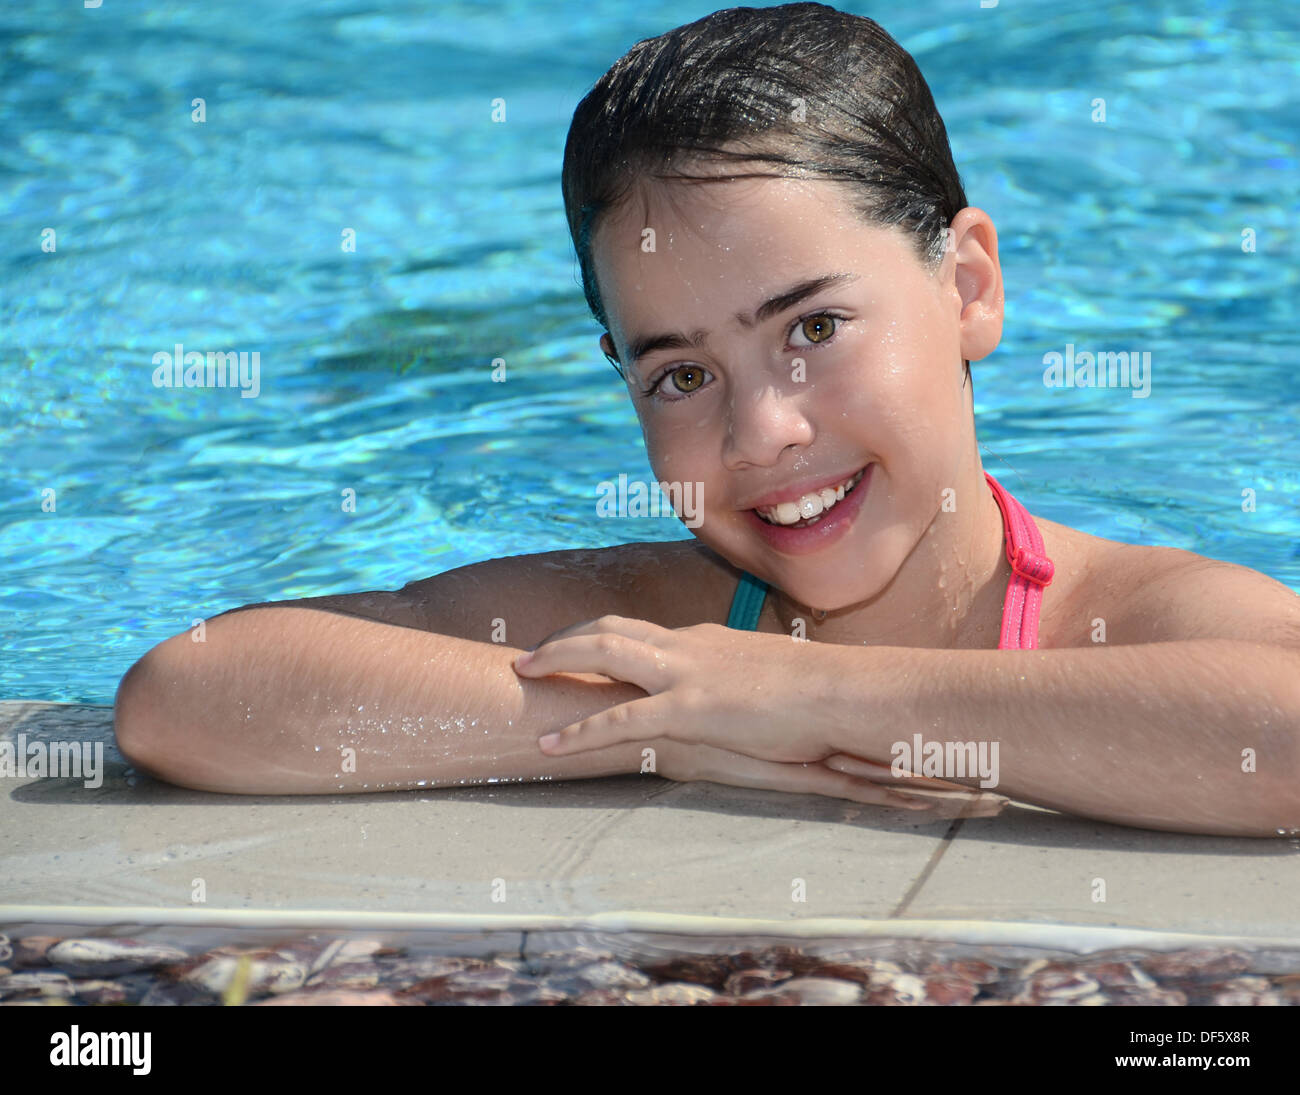 Teenager at the pool - 12 year old teenage girl relaxing at the pool Stock Photo